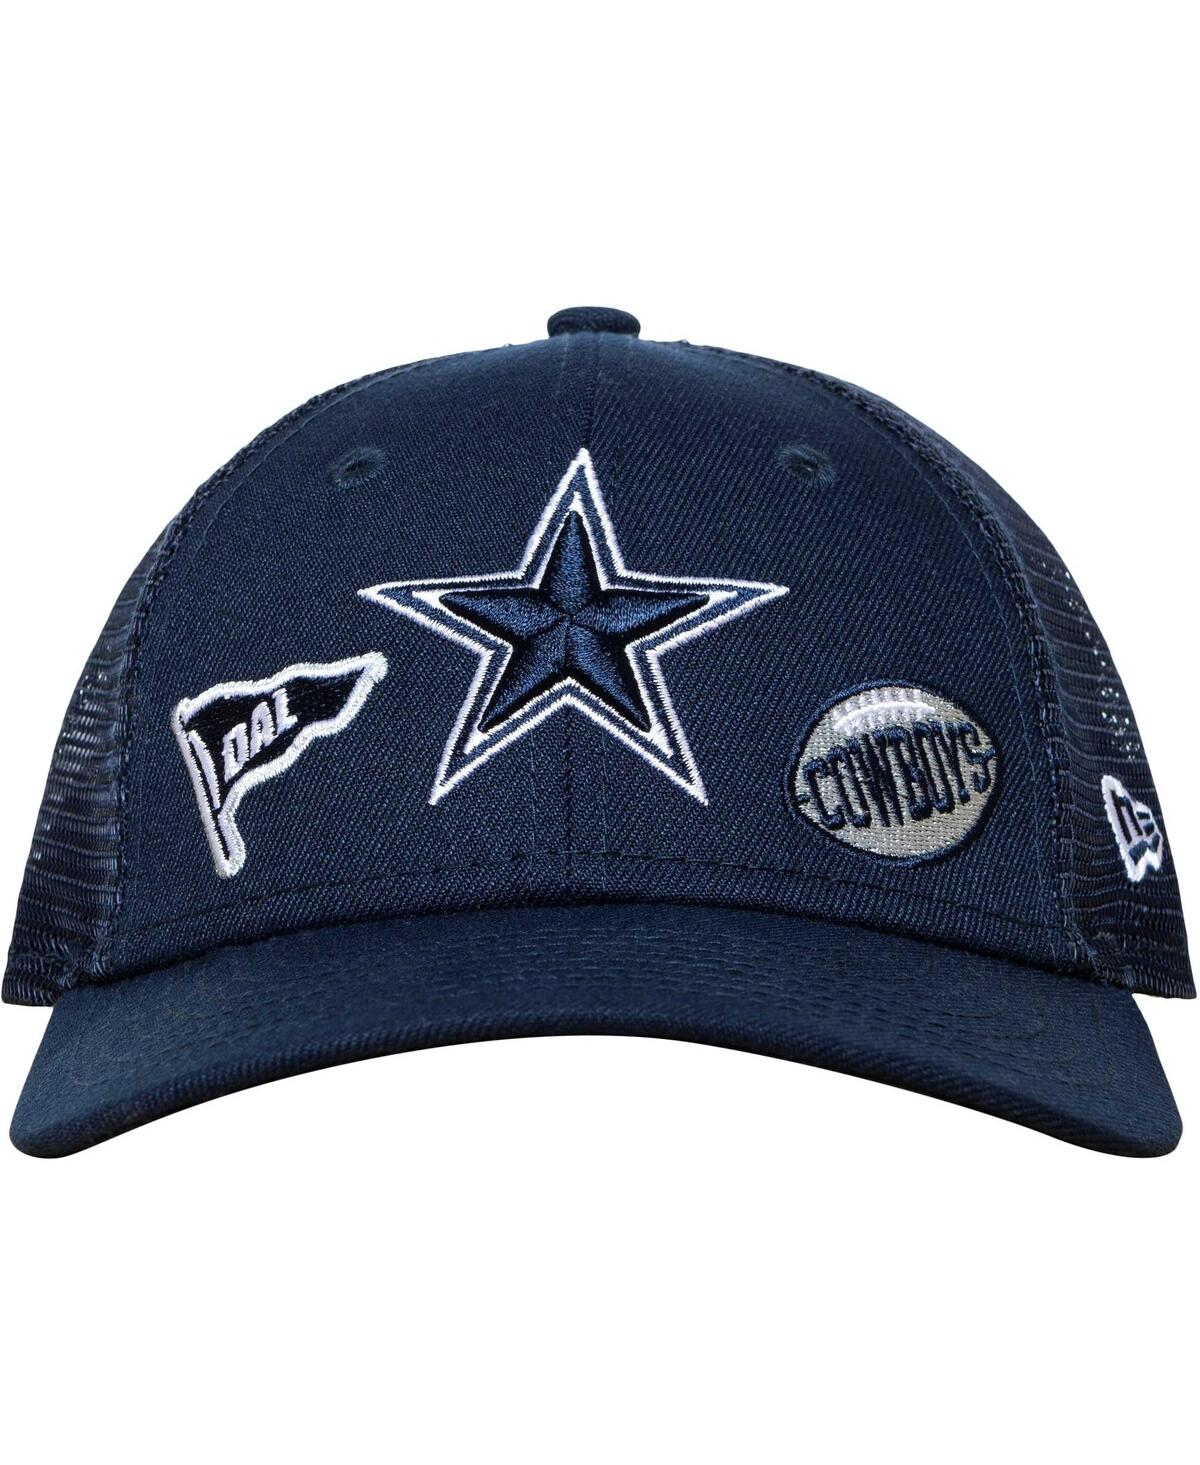 New Era Babies' Little Boys And Girls  Navy Dallas Cowboys 9forty Adjustable Trucker Hat